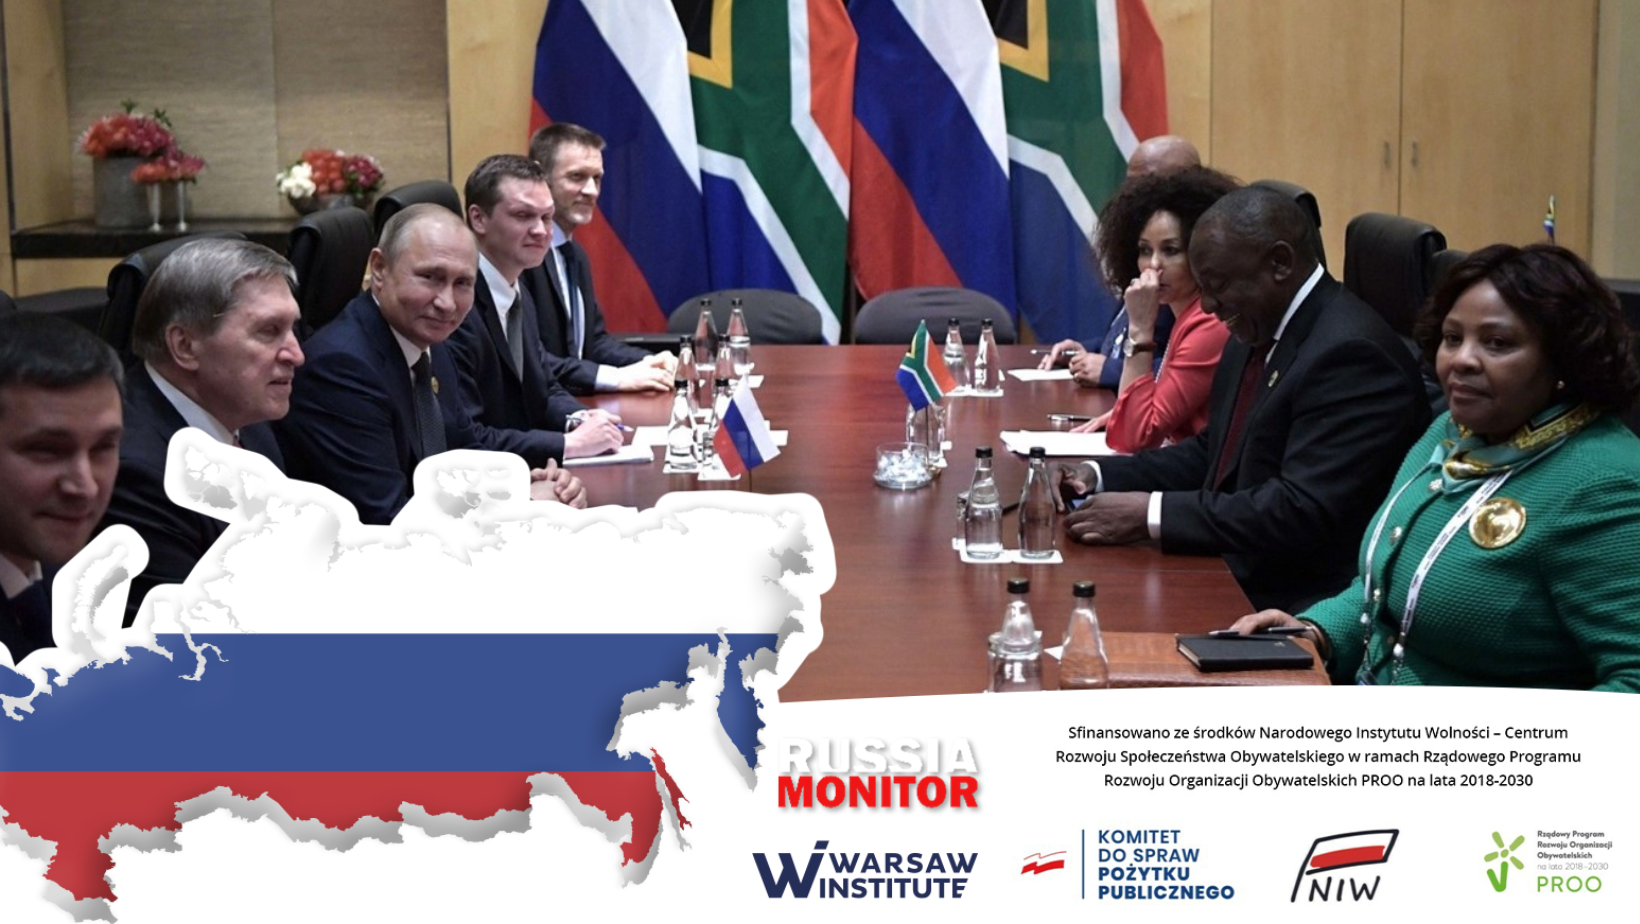 South Africa, Russia’s Biggest African Ally